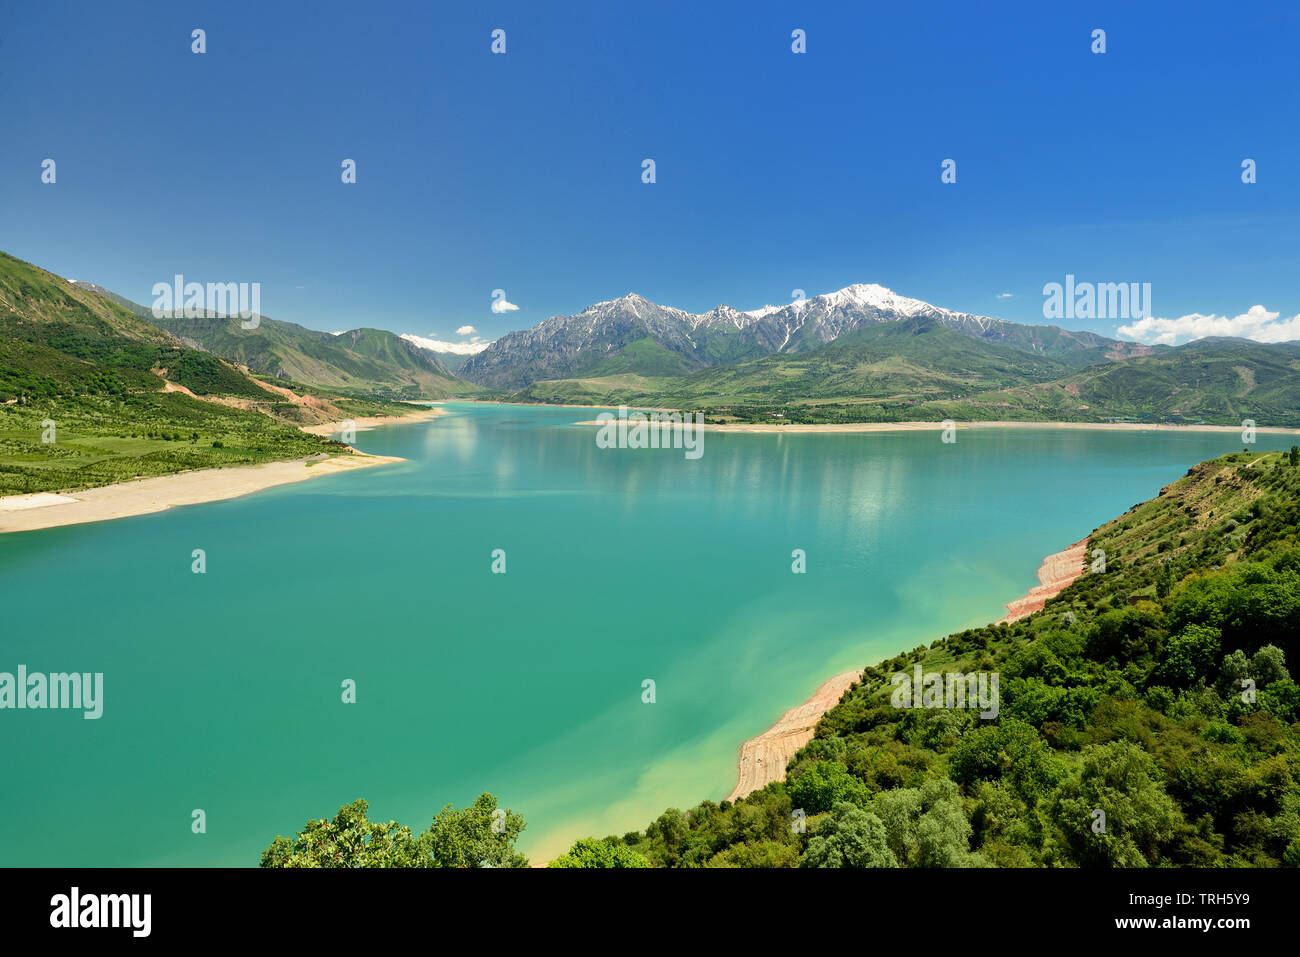 Landscape of the lake and the mountains in Ugam - Chatkal National Park, holiday destination  of hiking and adventure-sport located near the Tashkent, Stock Photo